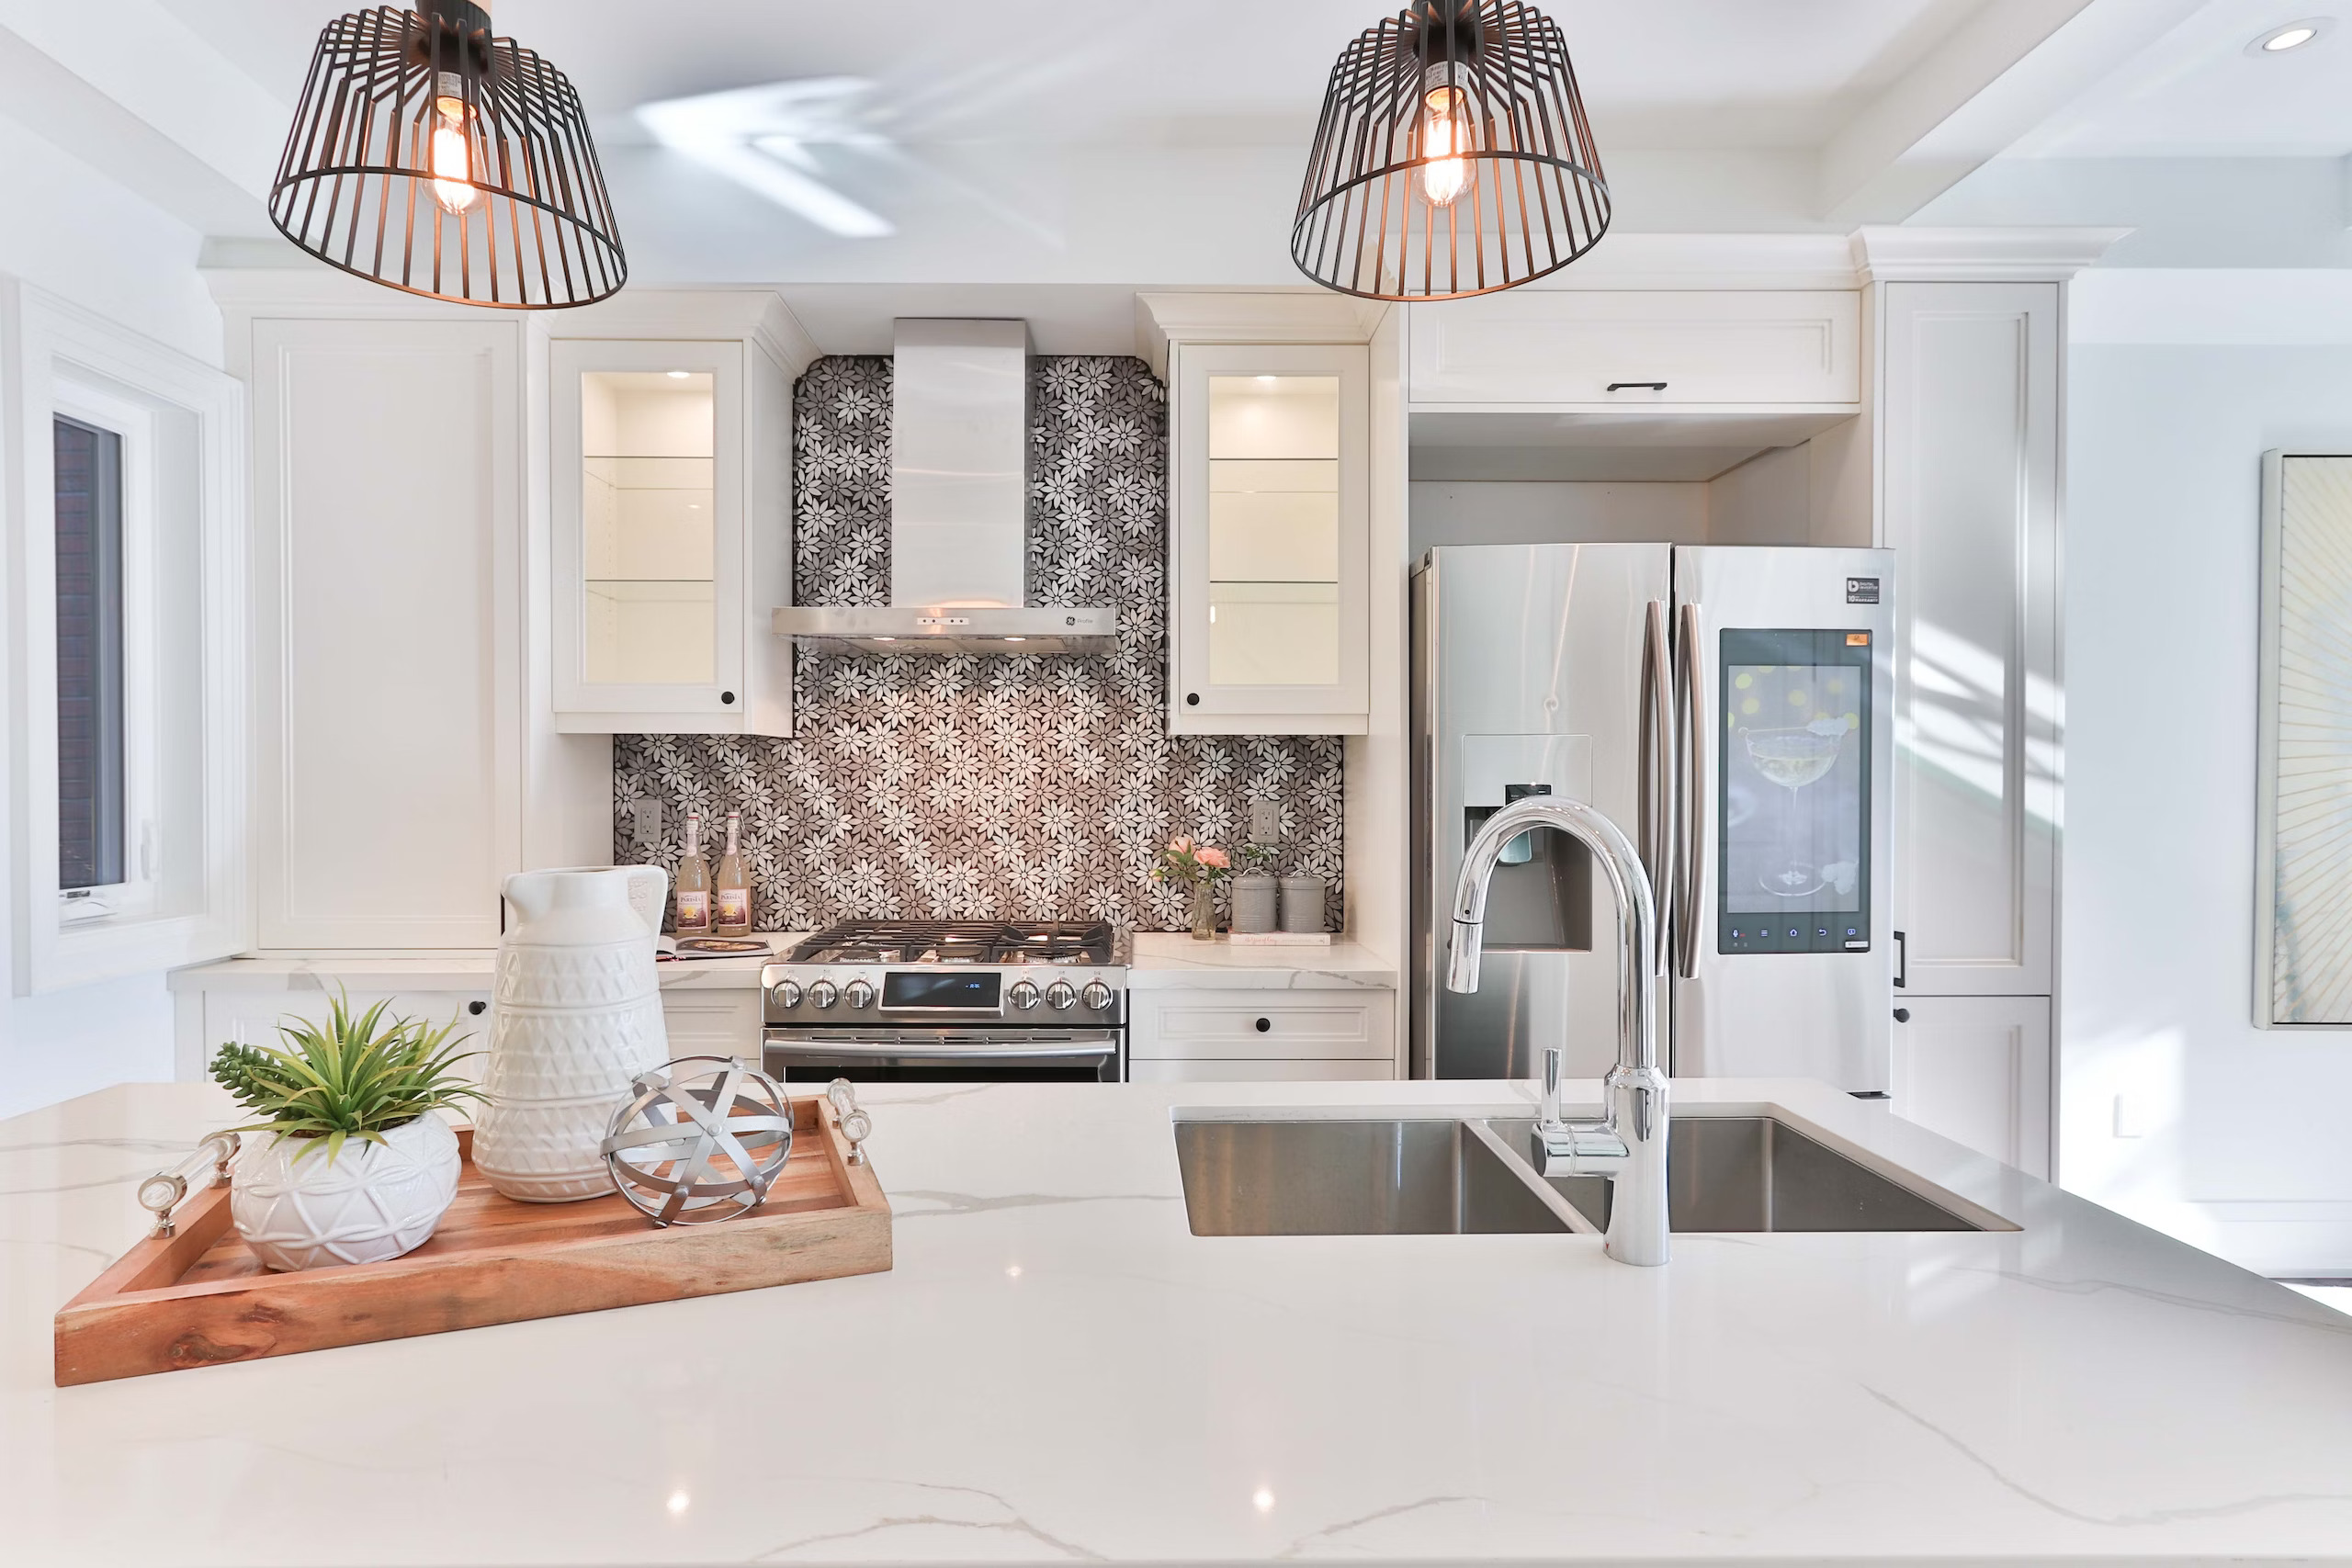 Kitchen Remodel Design Ideas Transforming Your Culinary Space